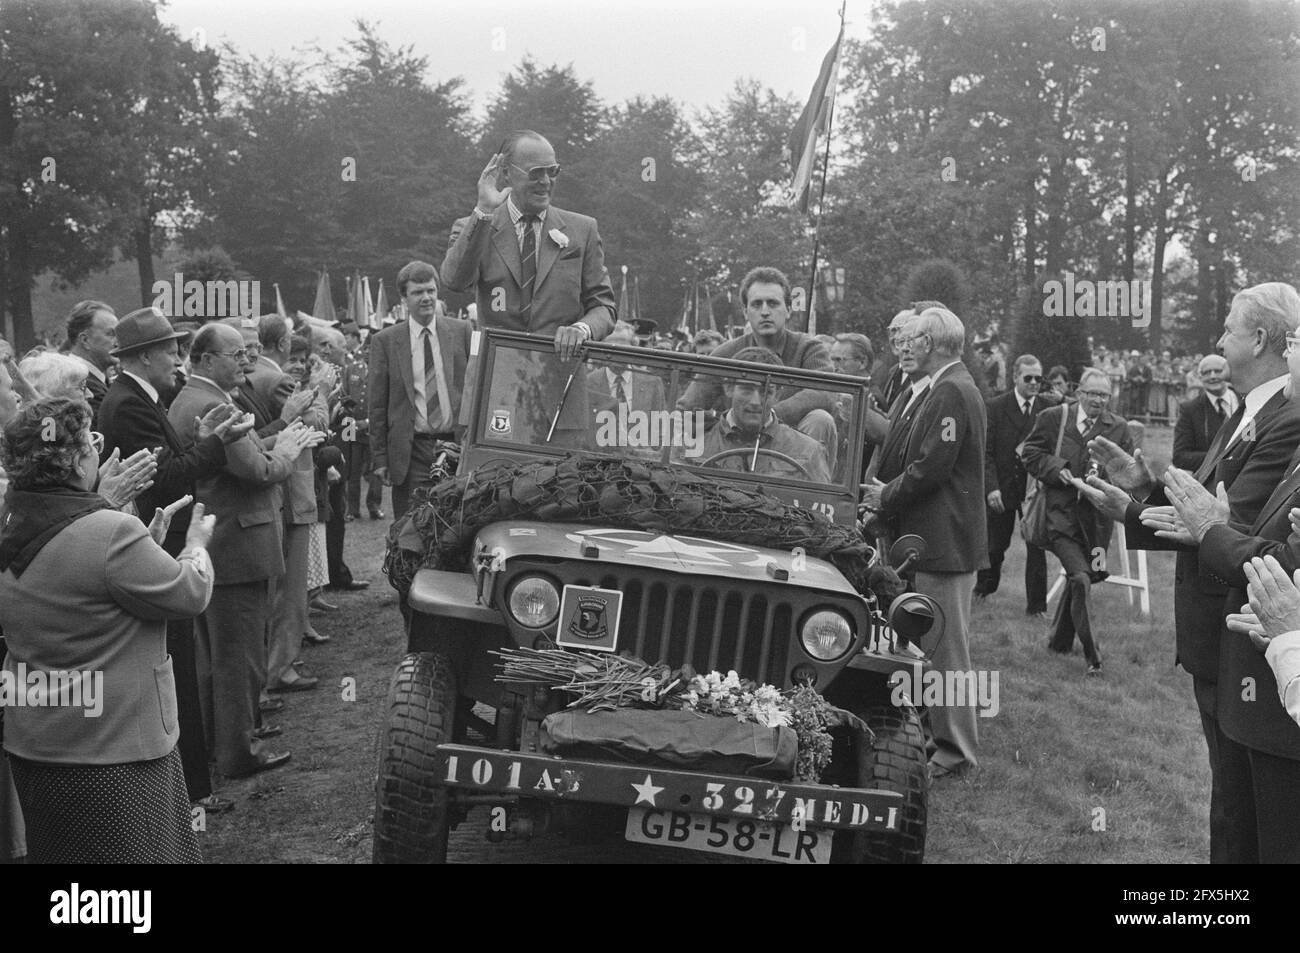 Prince Bernhard attends the meeting on the occasion of the 40th anniversary of the liberation in Heeswijk-Dinter, September 19, 1984, jeeps, veterans, The Netherlands, 20th century press agency photo, news to remember, documentary, historic photography 1945-1990, visual stories, human history of the Twentieth Century, capturing moments in time Stock Photo